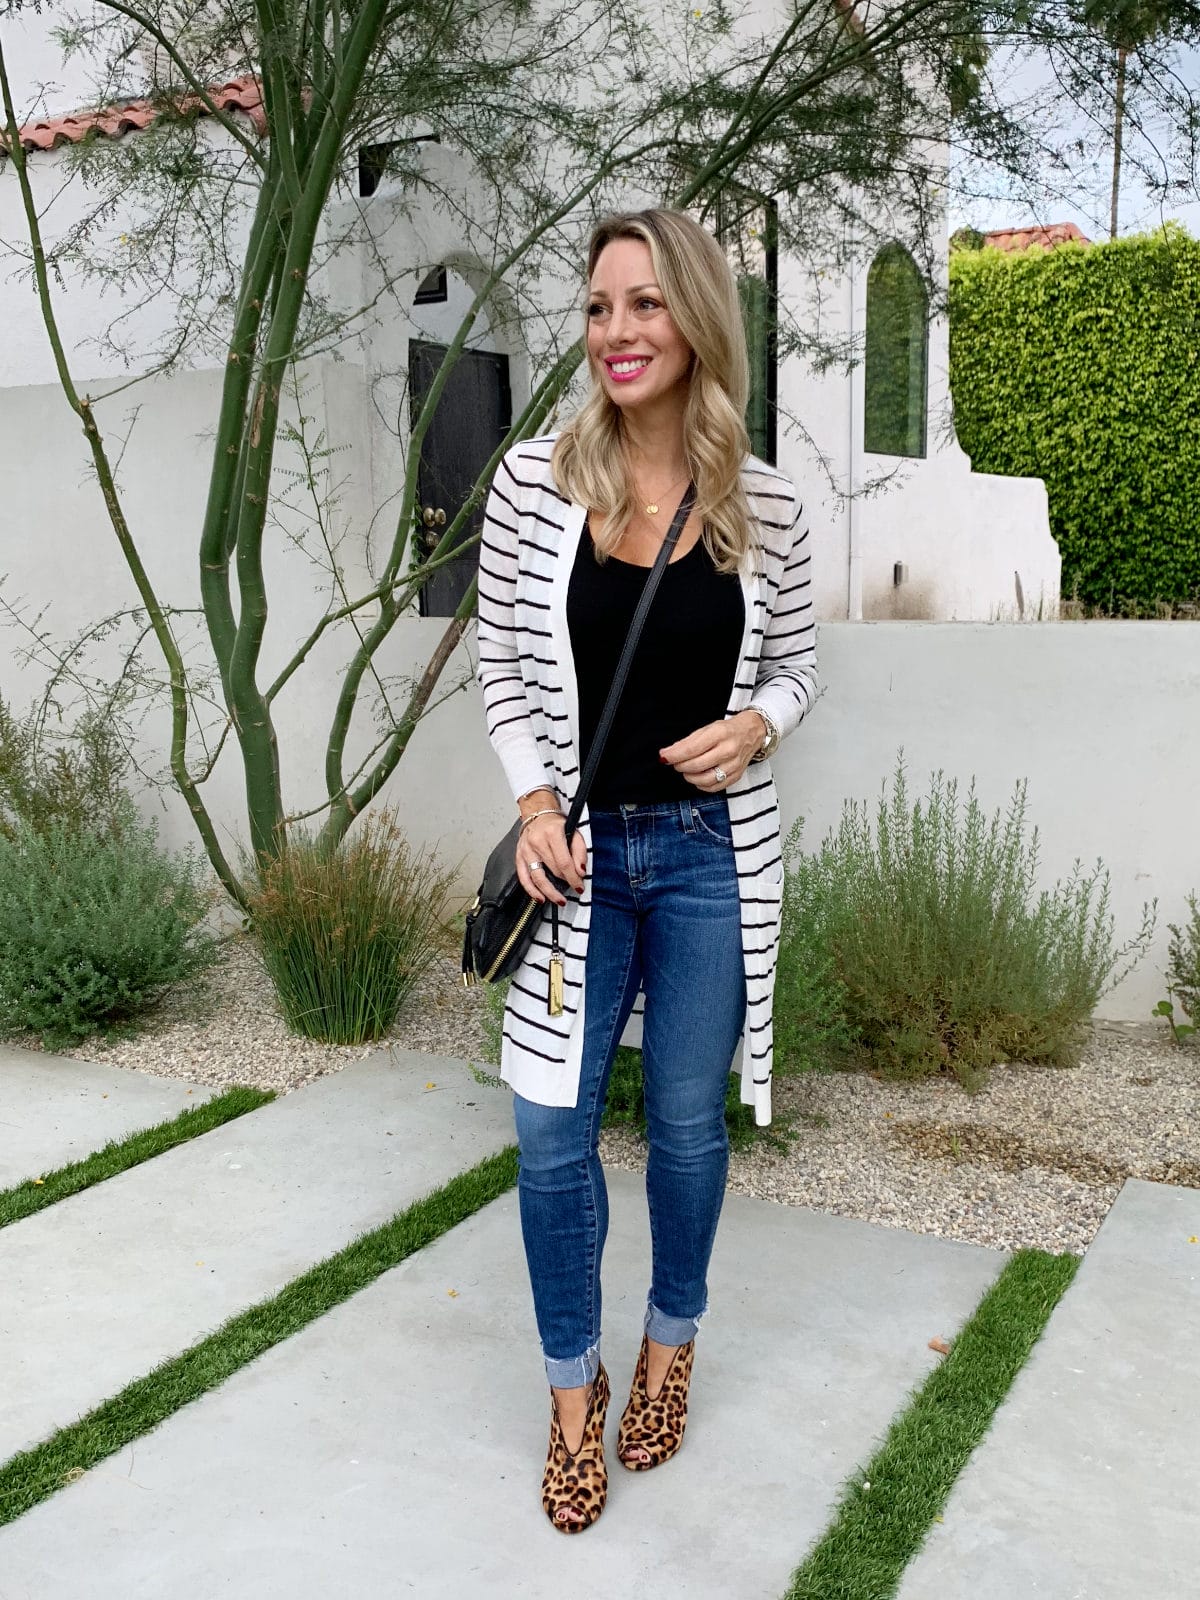 Cute Fall Outfit - long striped cardigan jeans and leopard booties